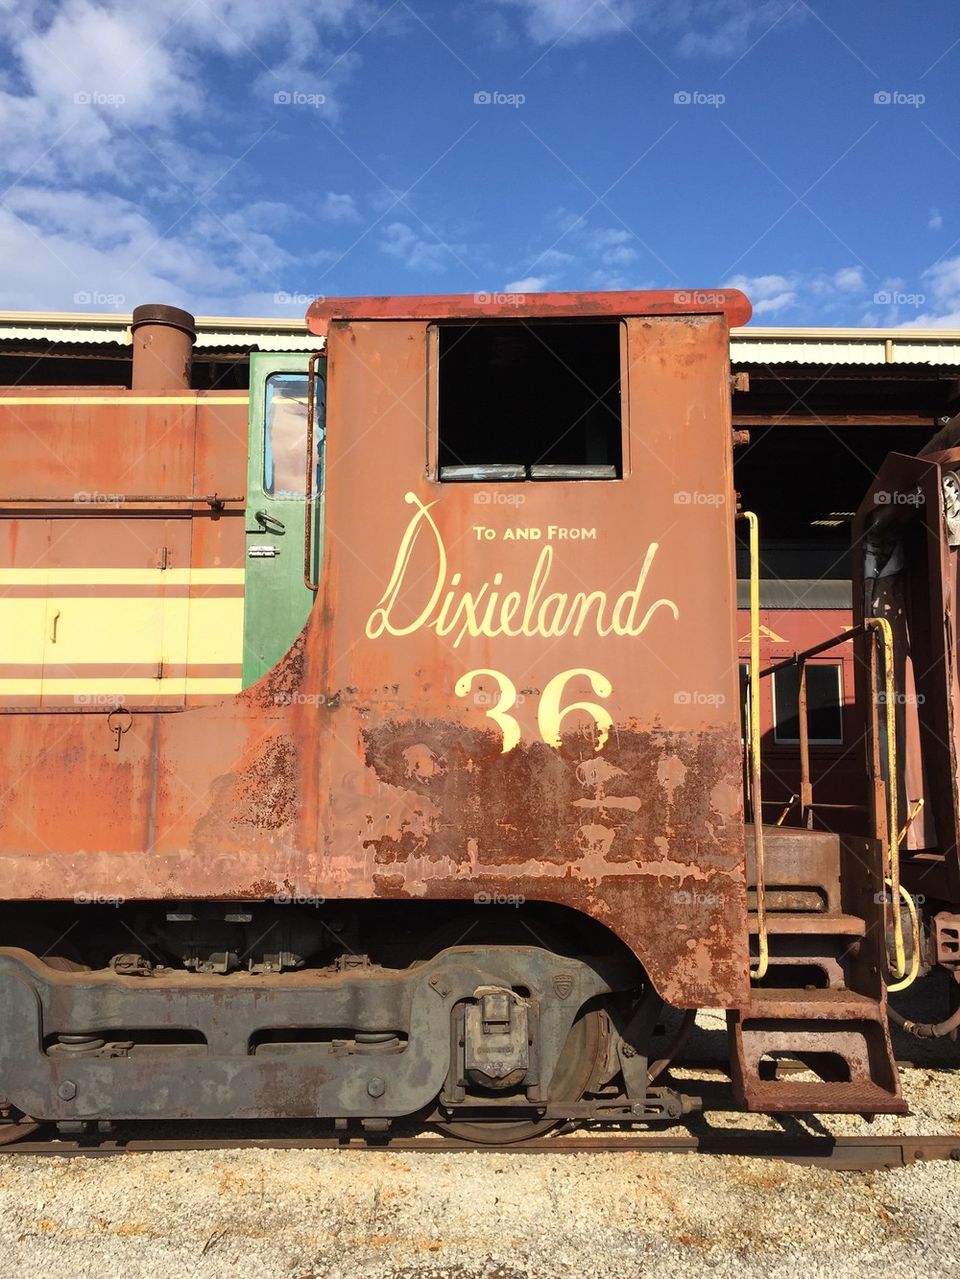 Tennessee Valley railroad - Dixieland